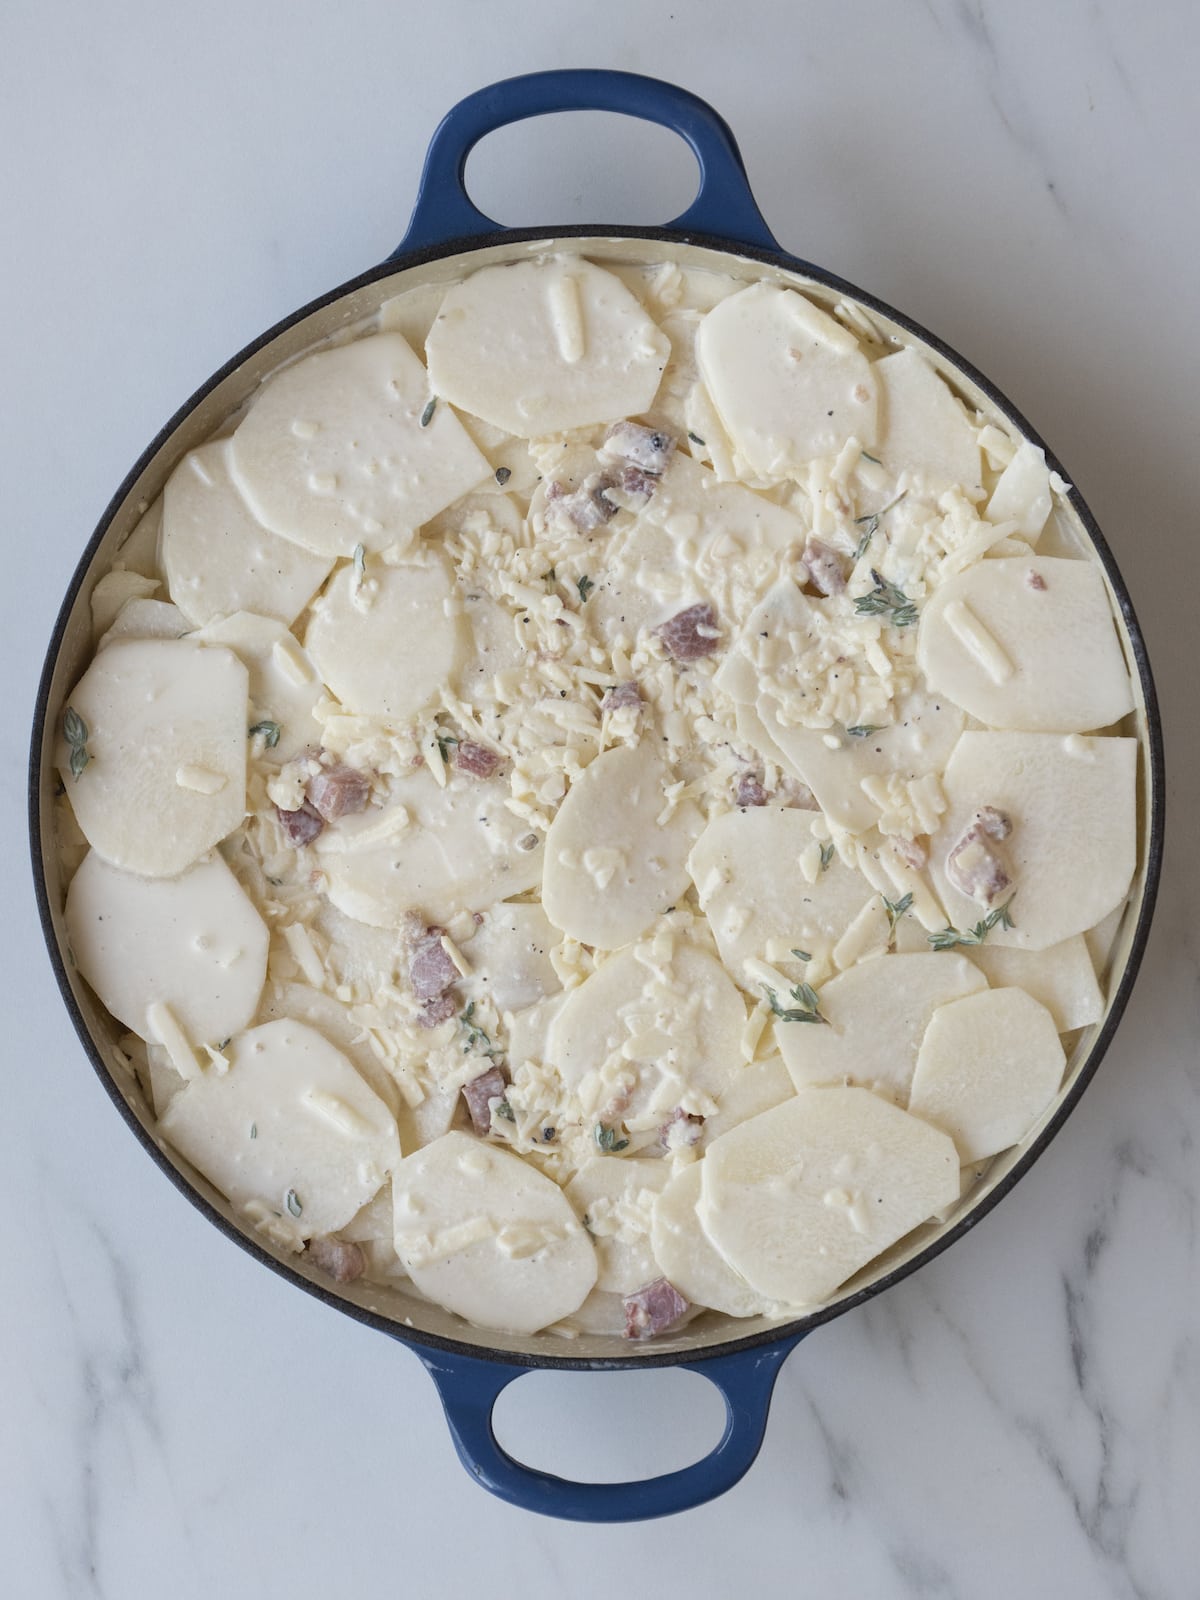 A blue round dutch oven with the potatoes coated in the cream mixture layered in circles, tightly packed.